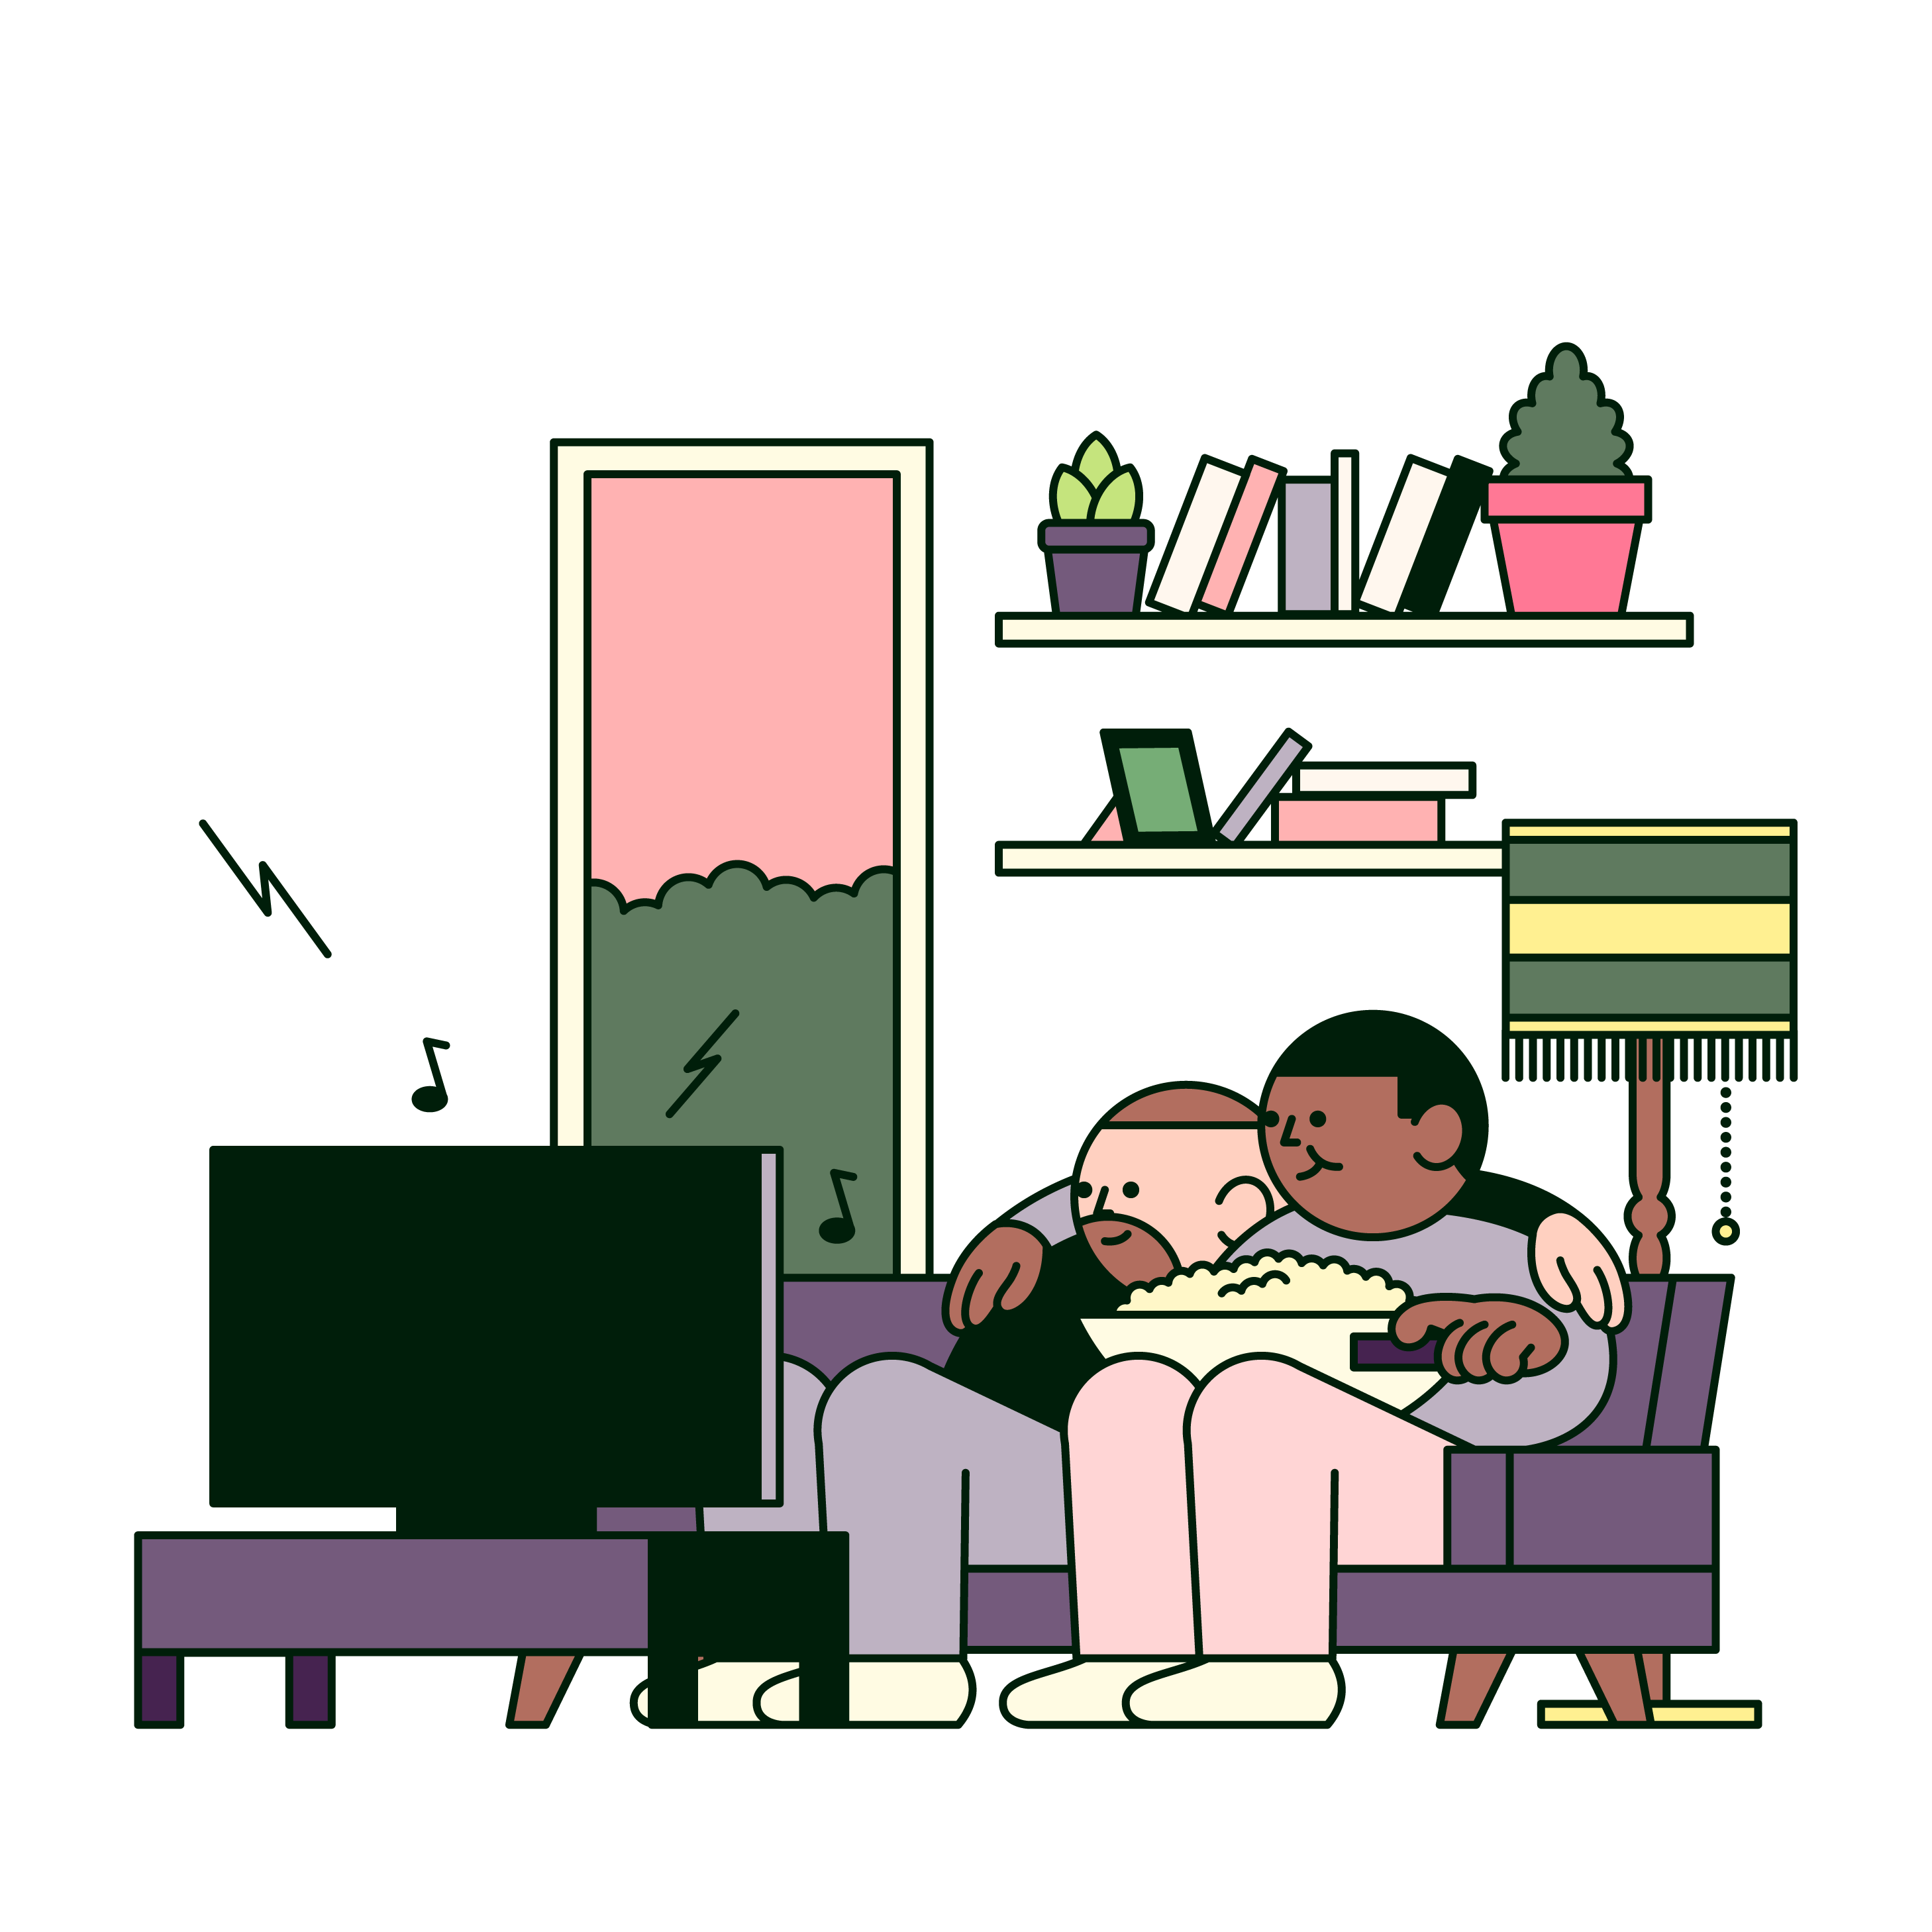 Couple watching TV and eating popcorn